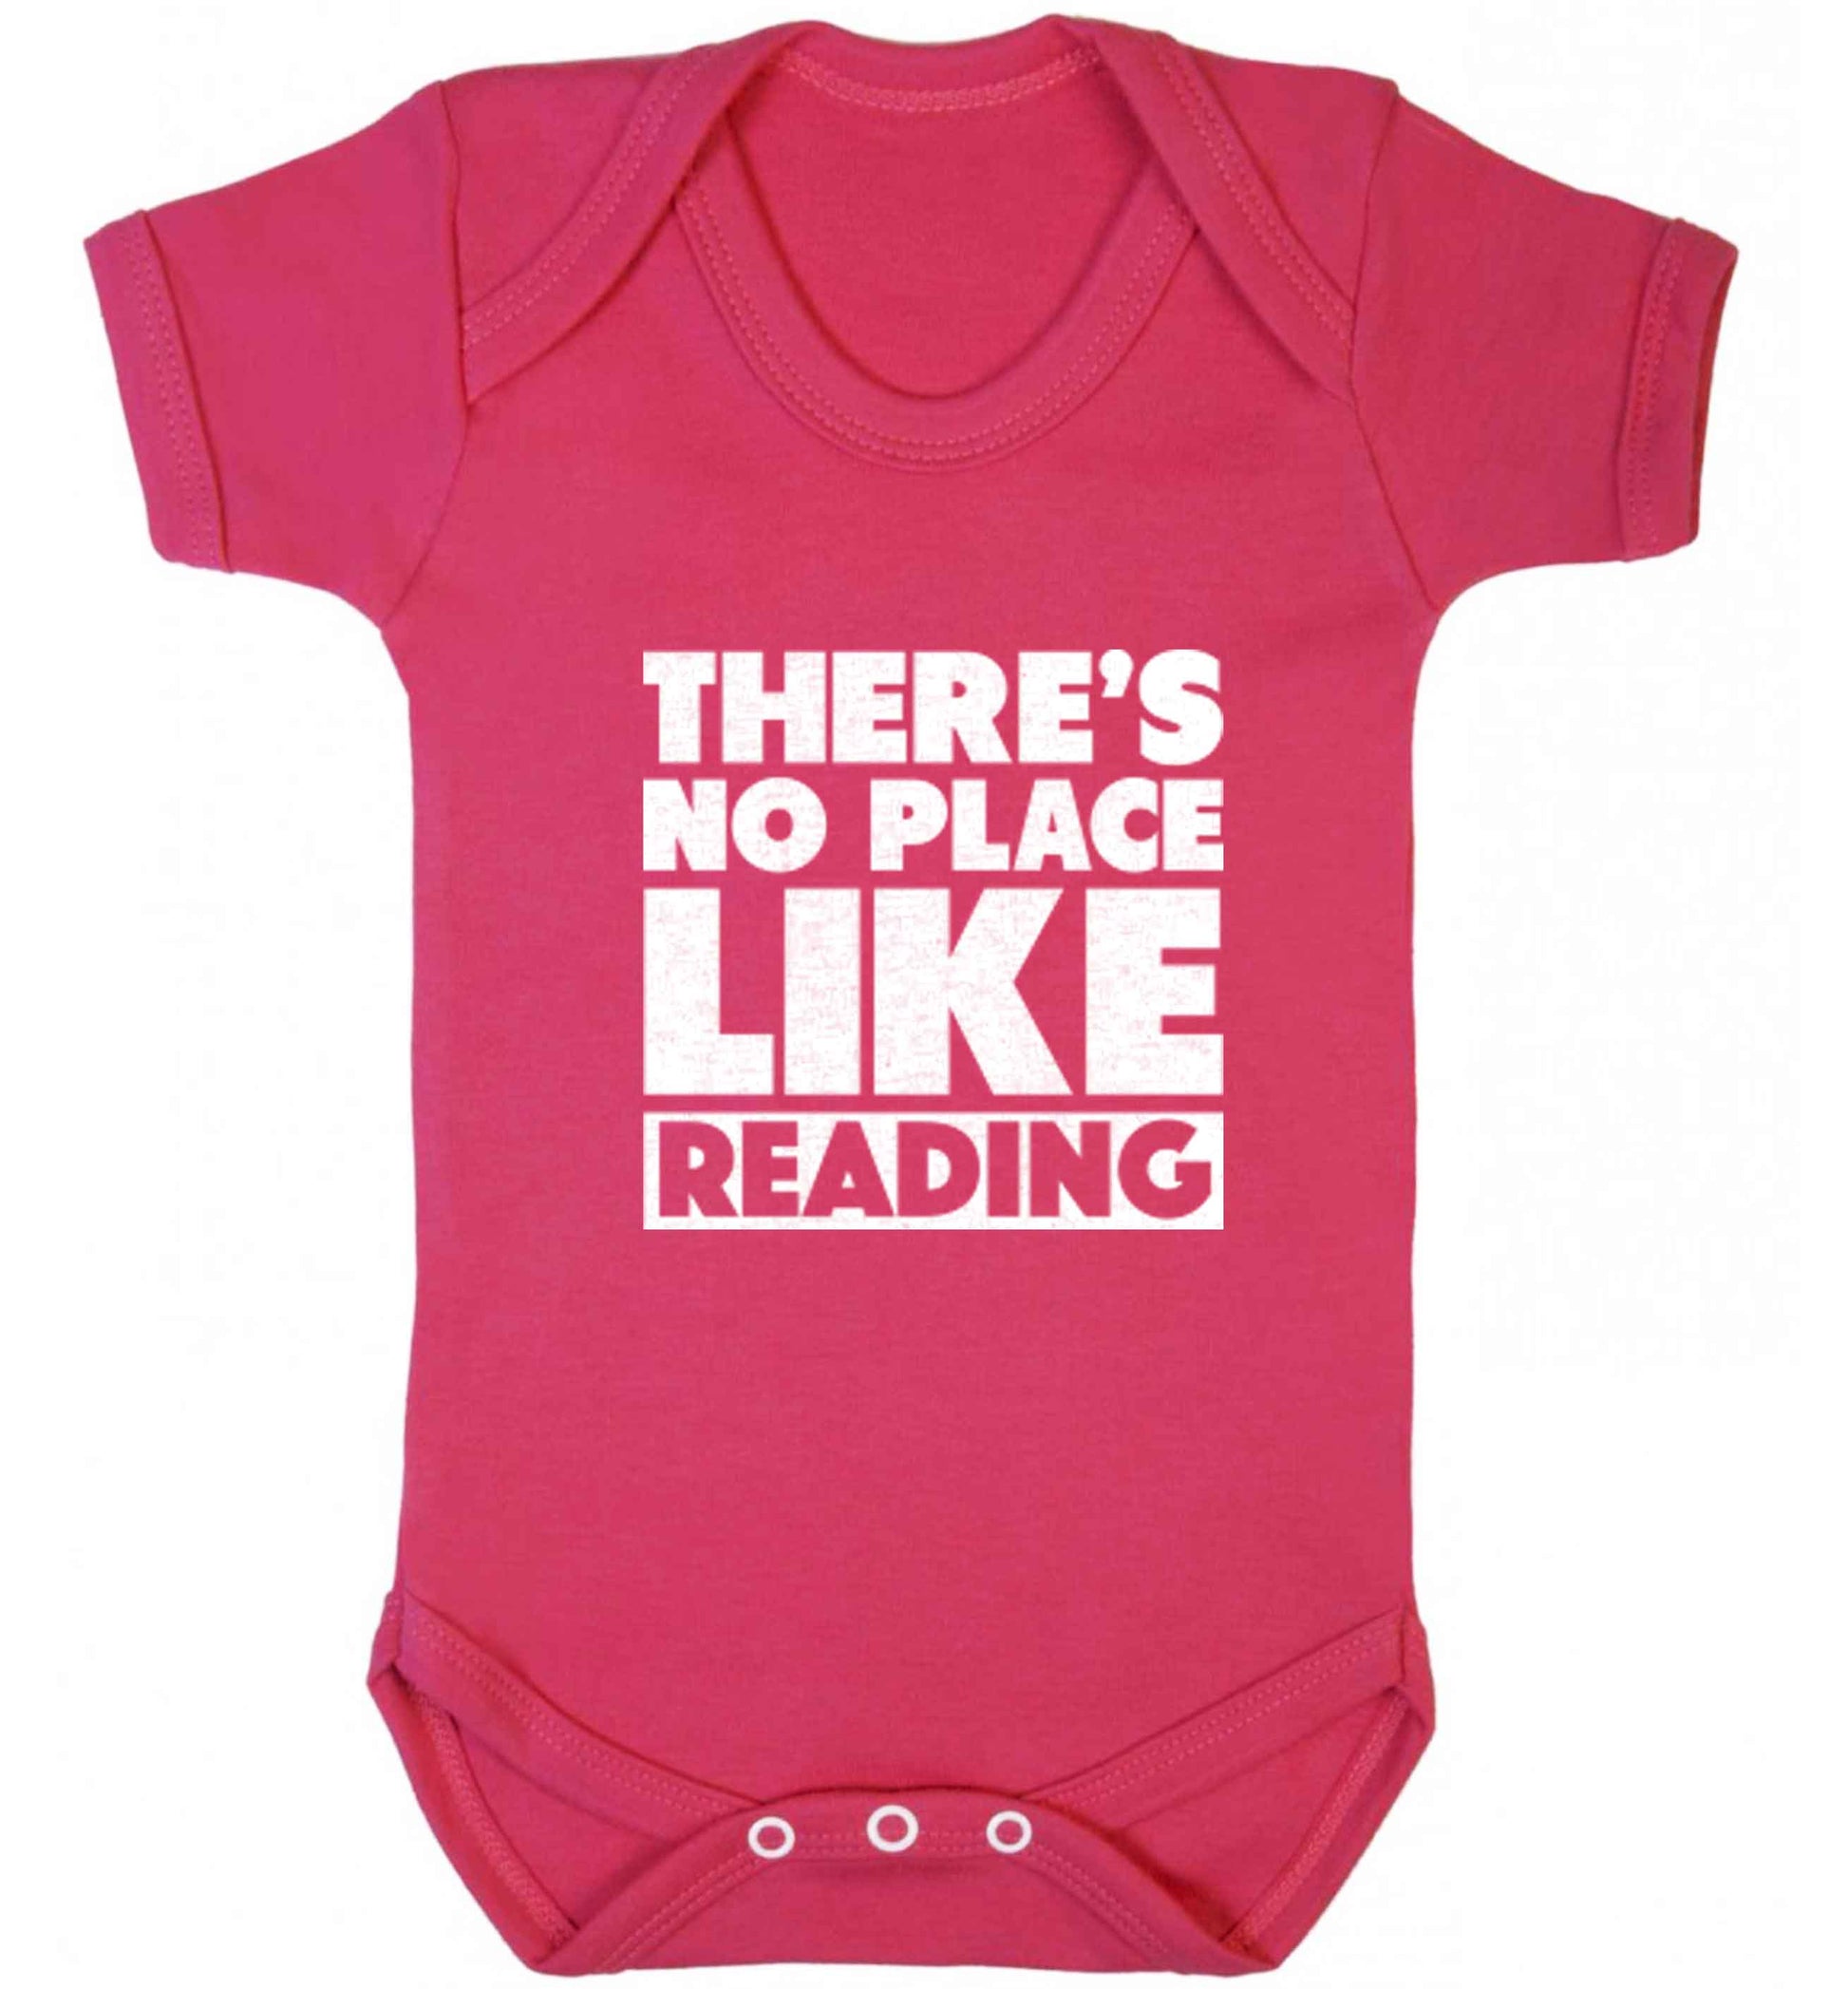 There's no place like Readingbaby vest dark pink 18-24 months